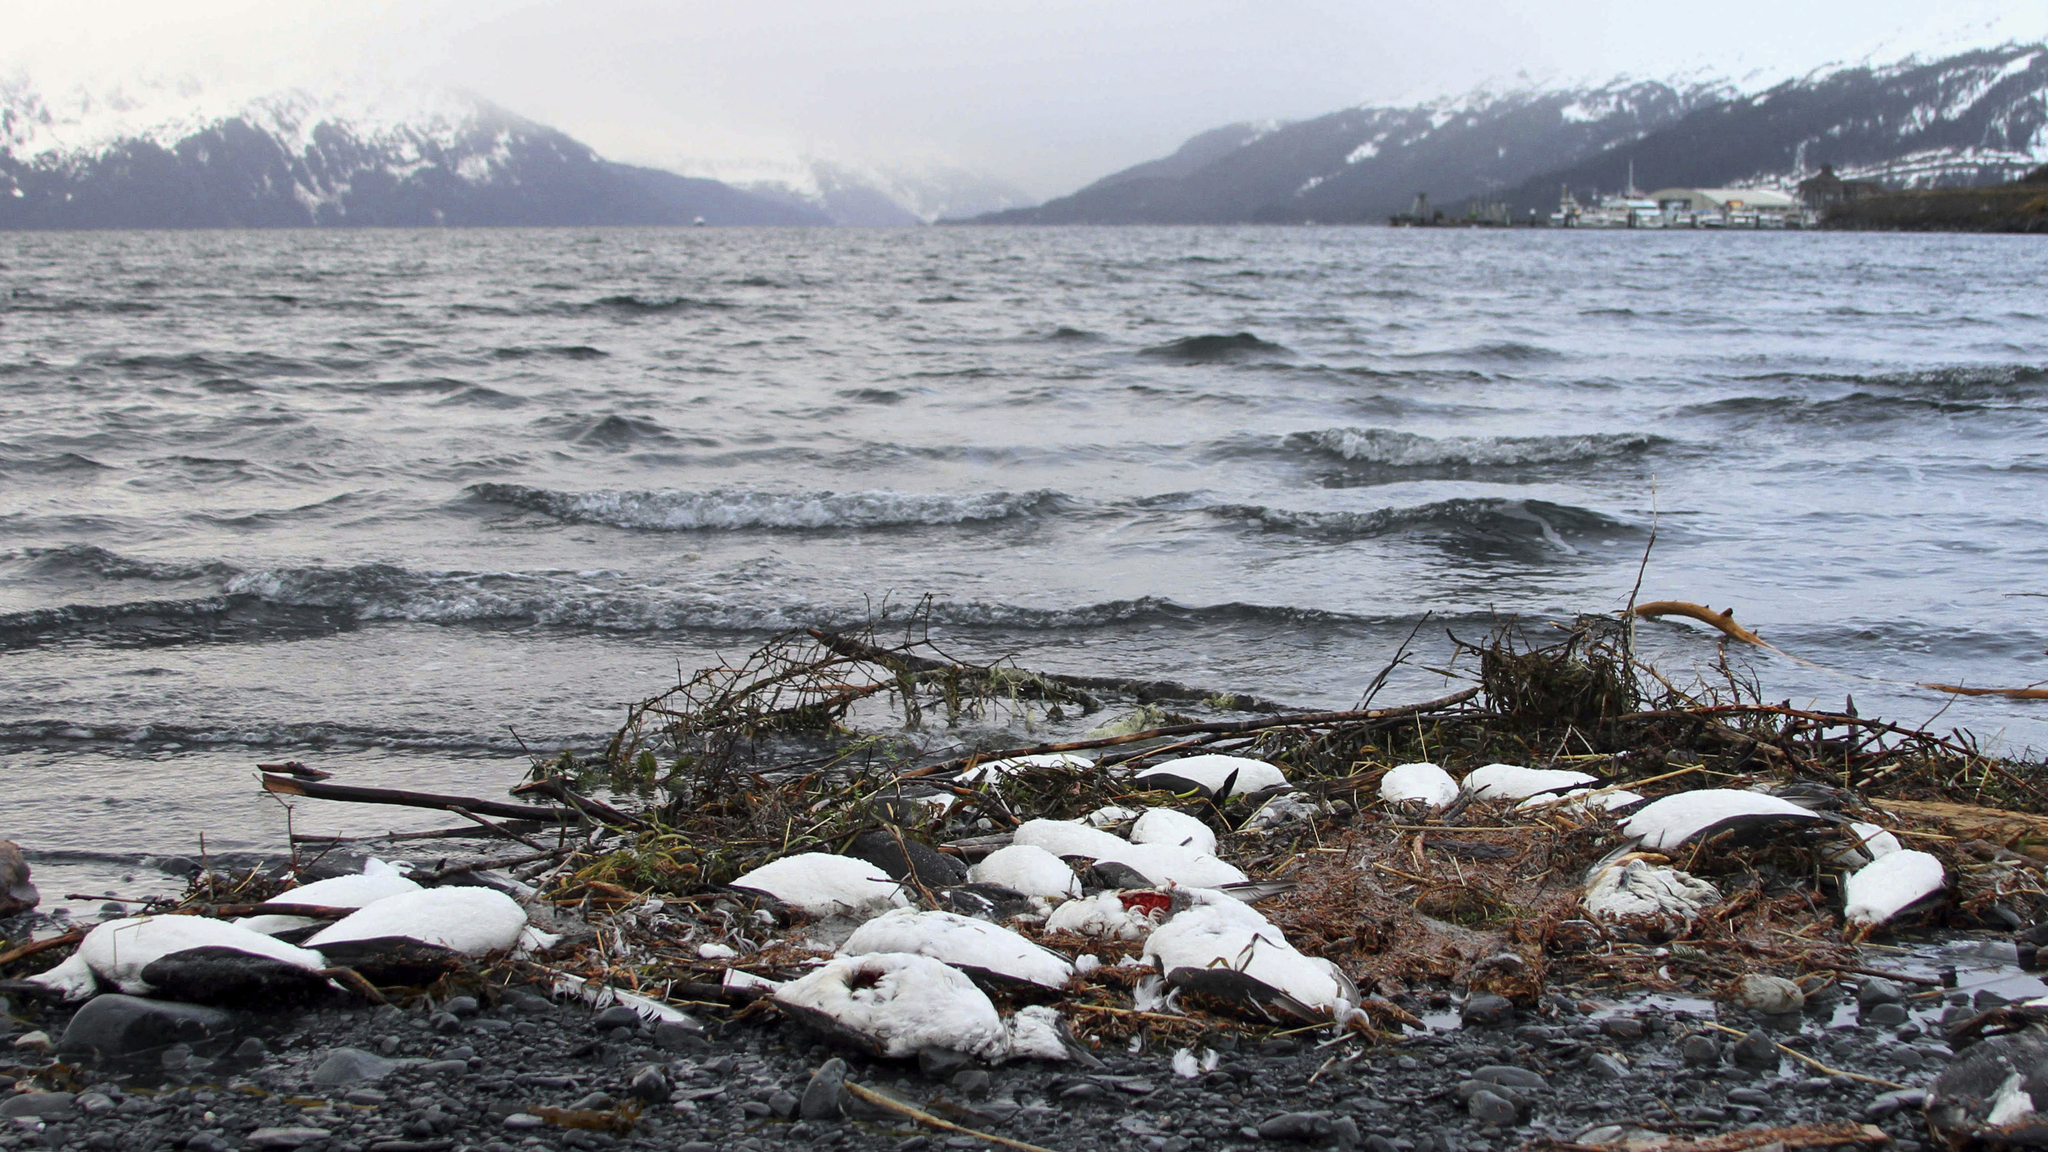 In this Jan. 7, 2016 photo, dead common murres lie washed up on a rocky beach in Whittier, Alaska. A year after tens of thousands of common murres, an abundant North Pacific seabird, starved and washed ashore on beaches from California to Alaska, researchers have pinned the cause to unusually warm ocean temperatures that affected the tiny fish they eat. (Mark Thiessen | The Associated Press file)